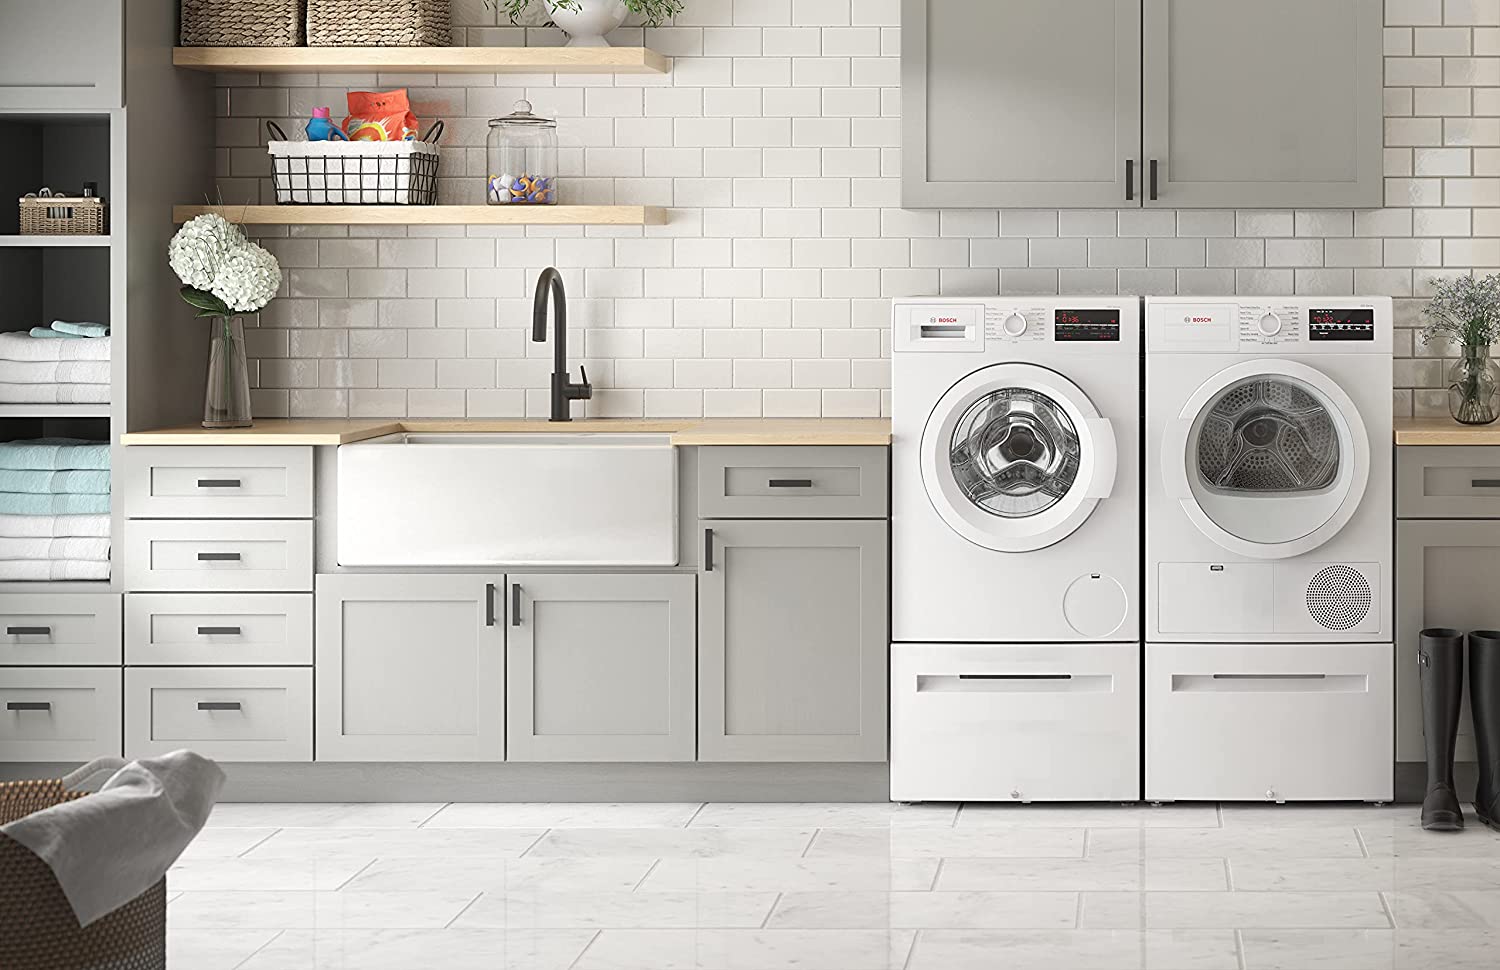 Bosch heat pump dryer in butler's pantry setting; white tile and gray cabinets